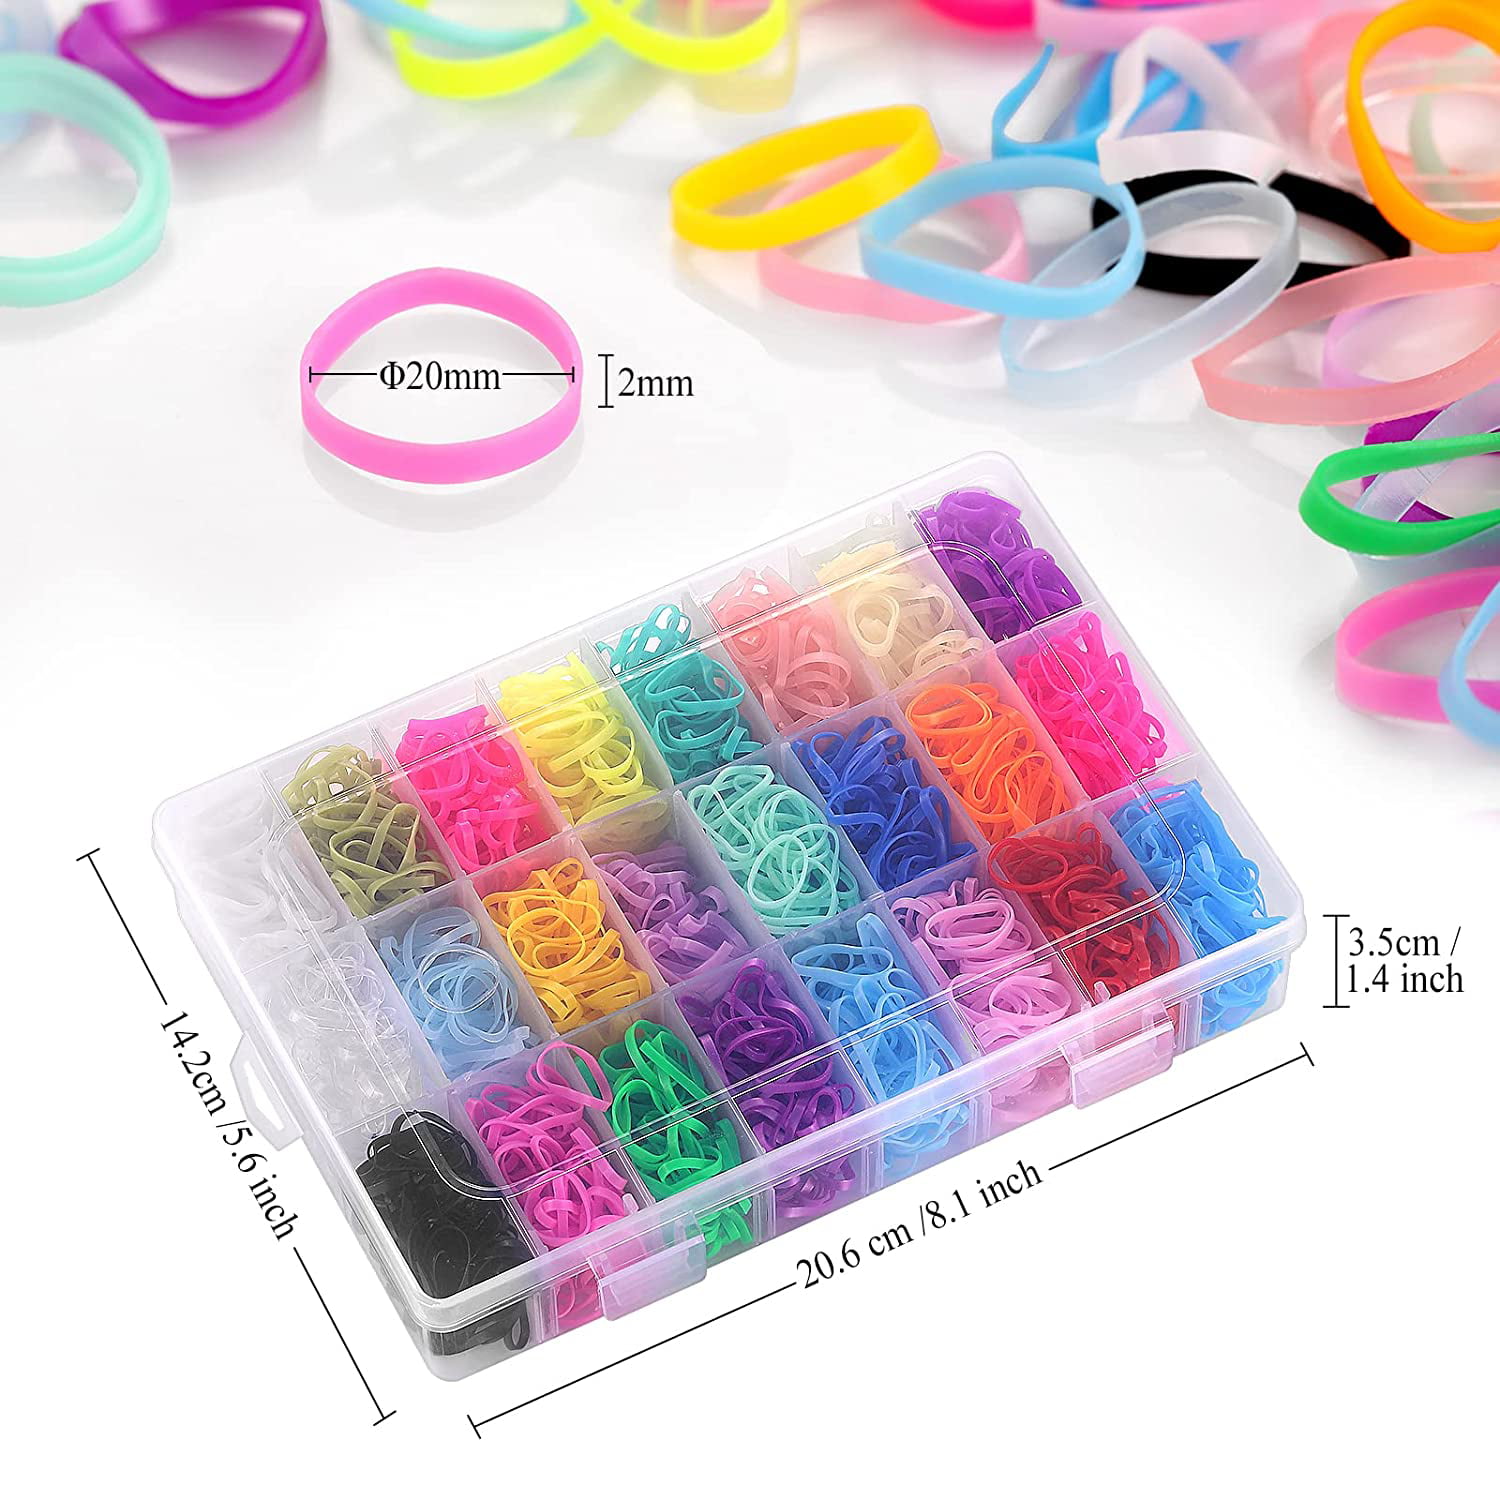 QIOKCKC 900 Tiny Rubber Bands Vibrant Color Mini Hair Ties with 3 Elk  Shaped Boxes Small Hair Elastics Little Hair Ties for Hair Elk Vibrant Color